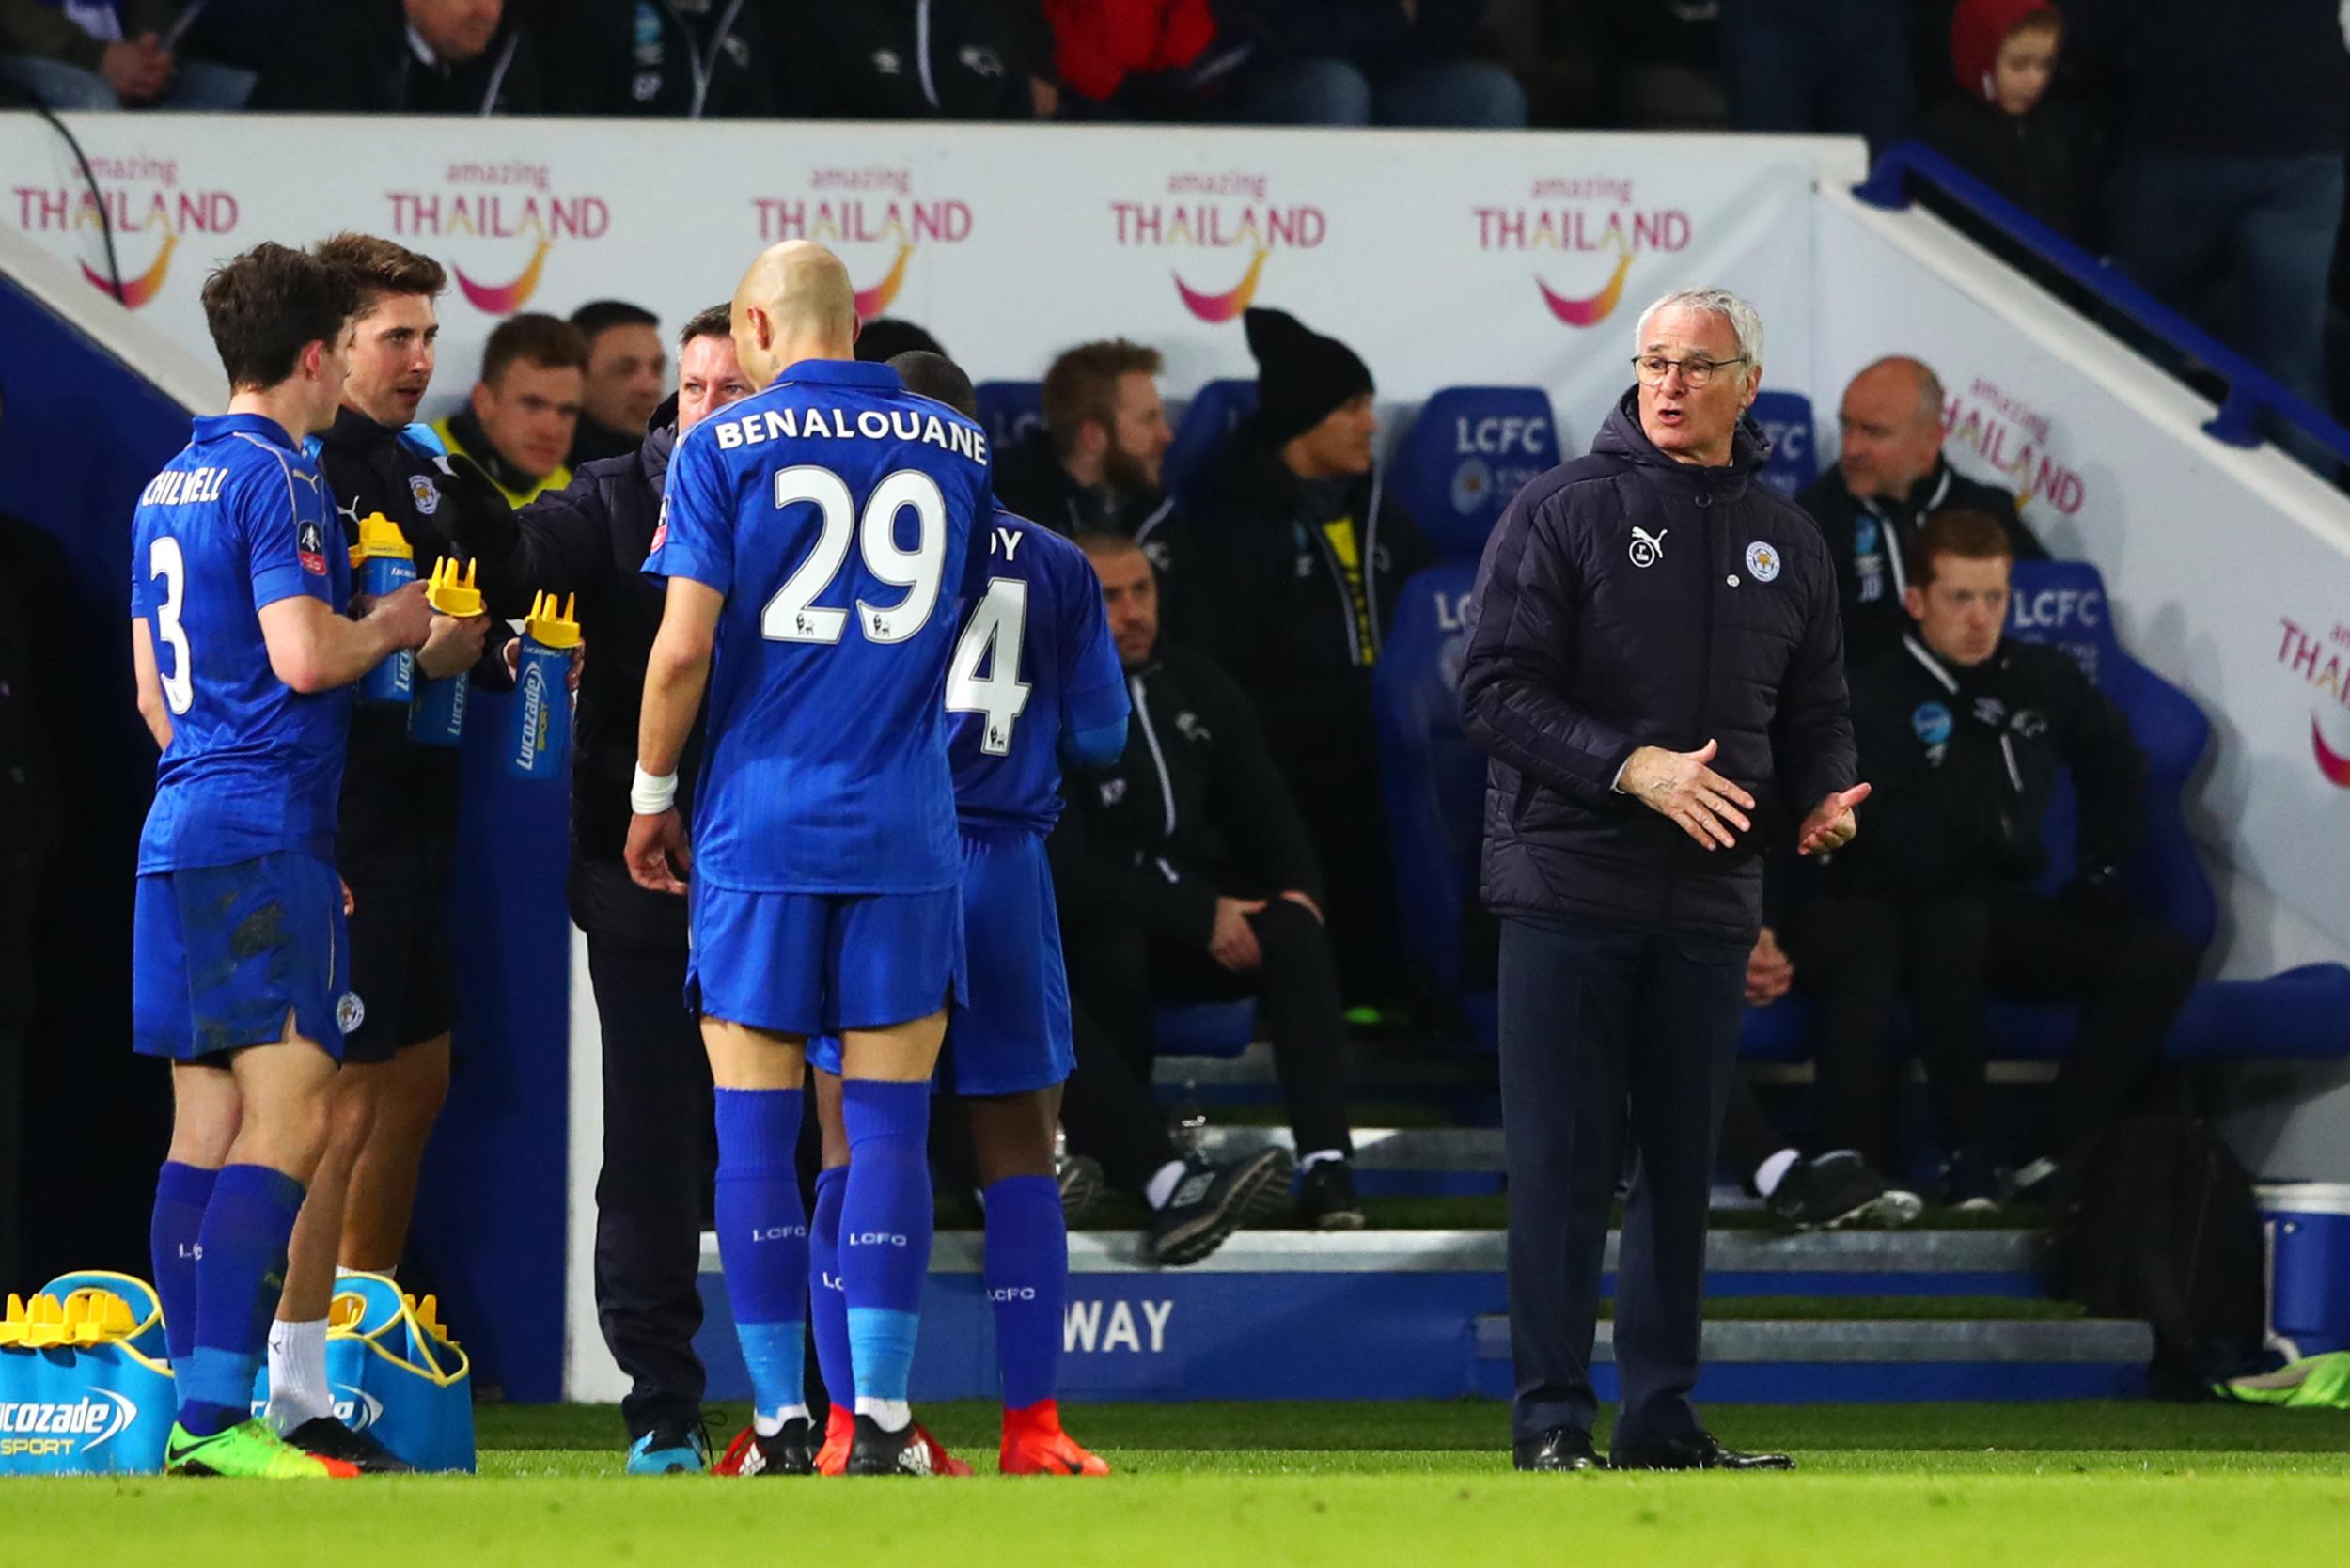 Ranieri issues his players with instructions ahead of extra-time at the King Power Stadium